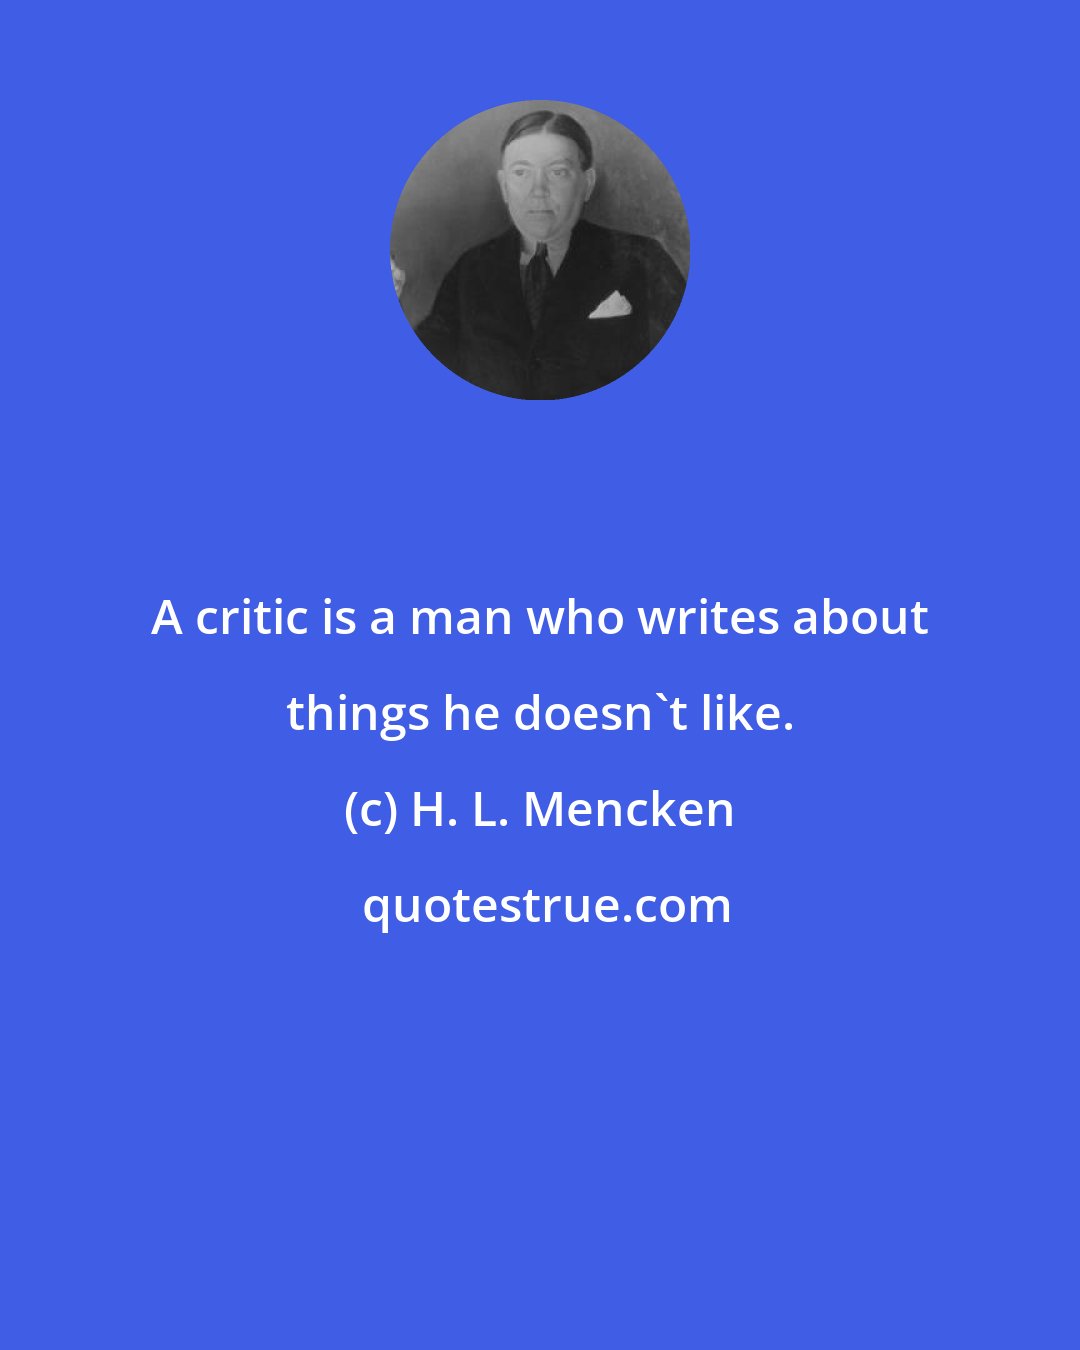 H. L. Mencken: A critic is a man who writes about things he doesn't like.